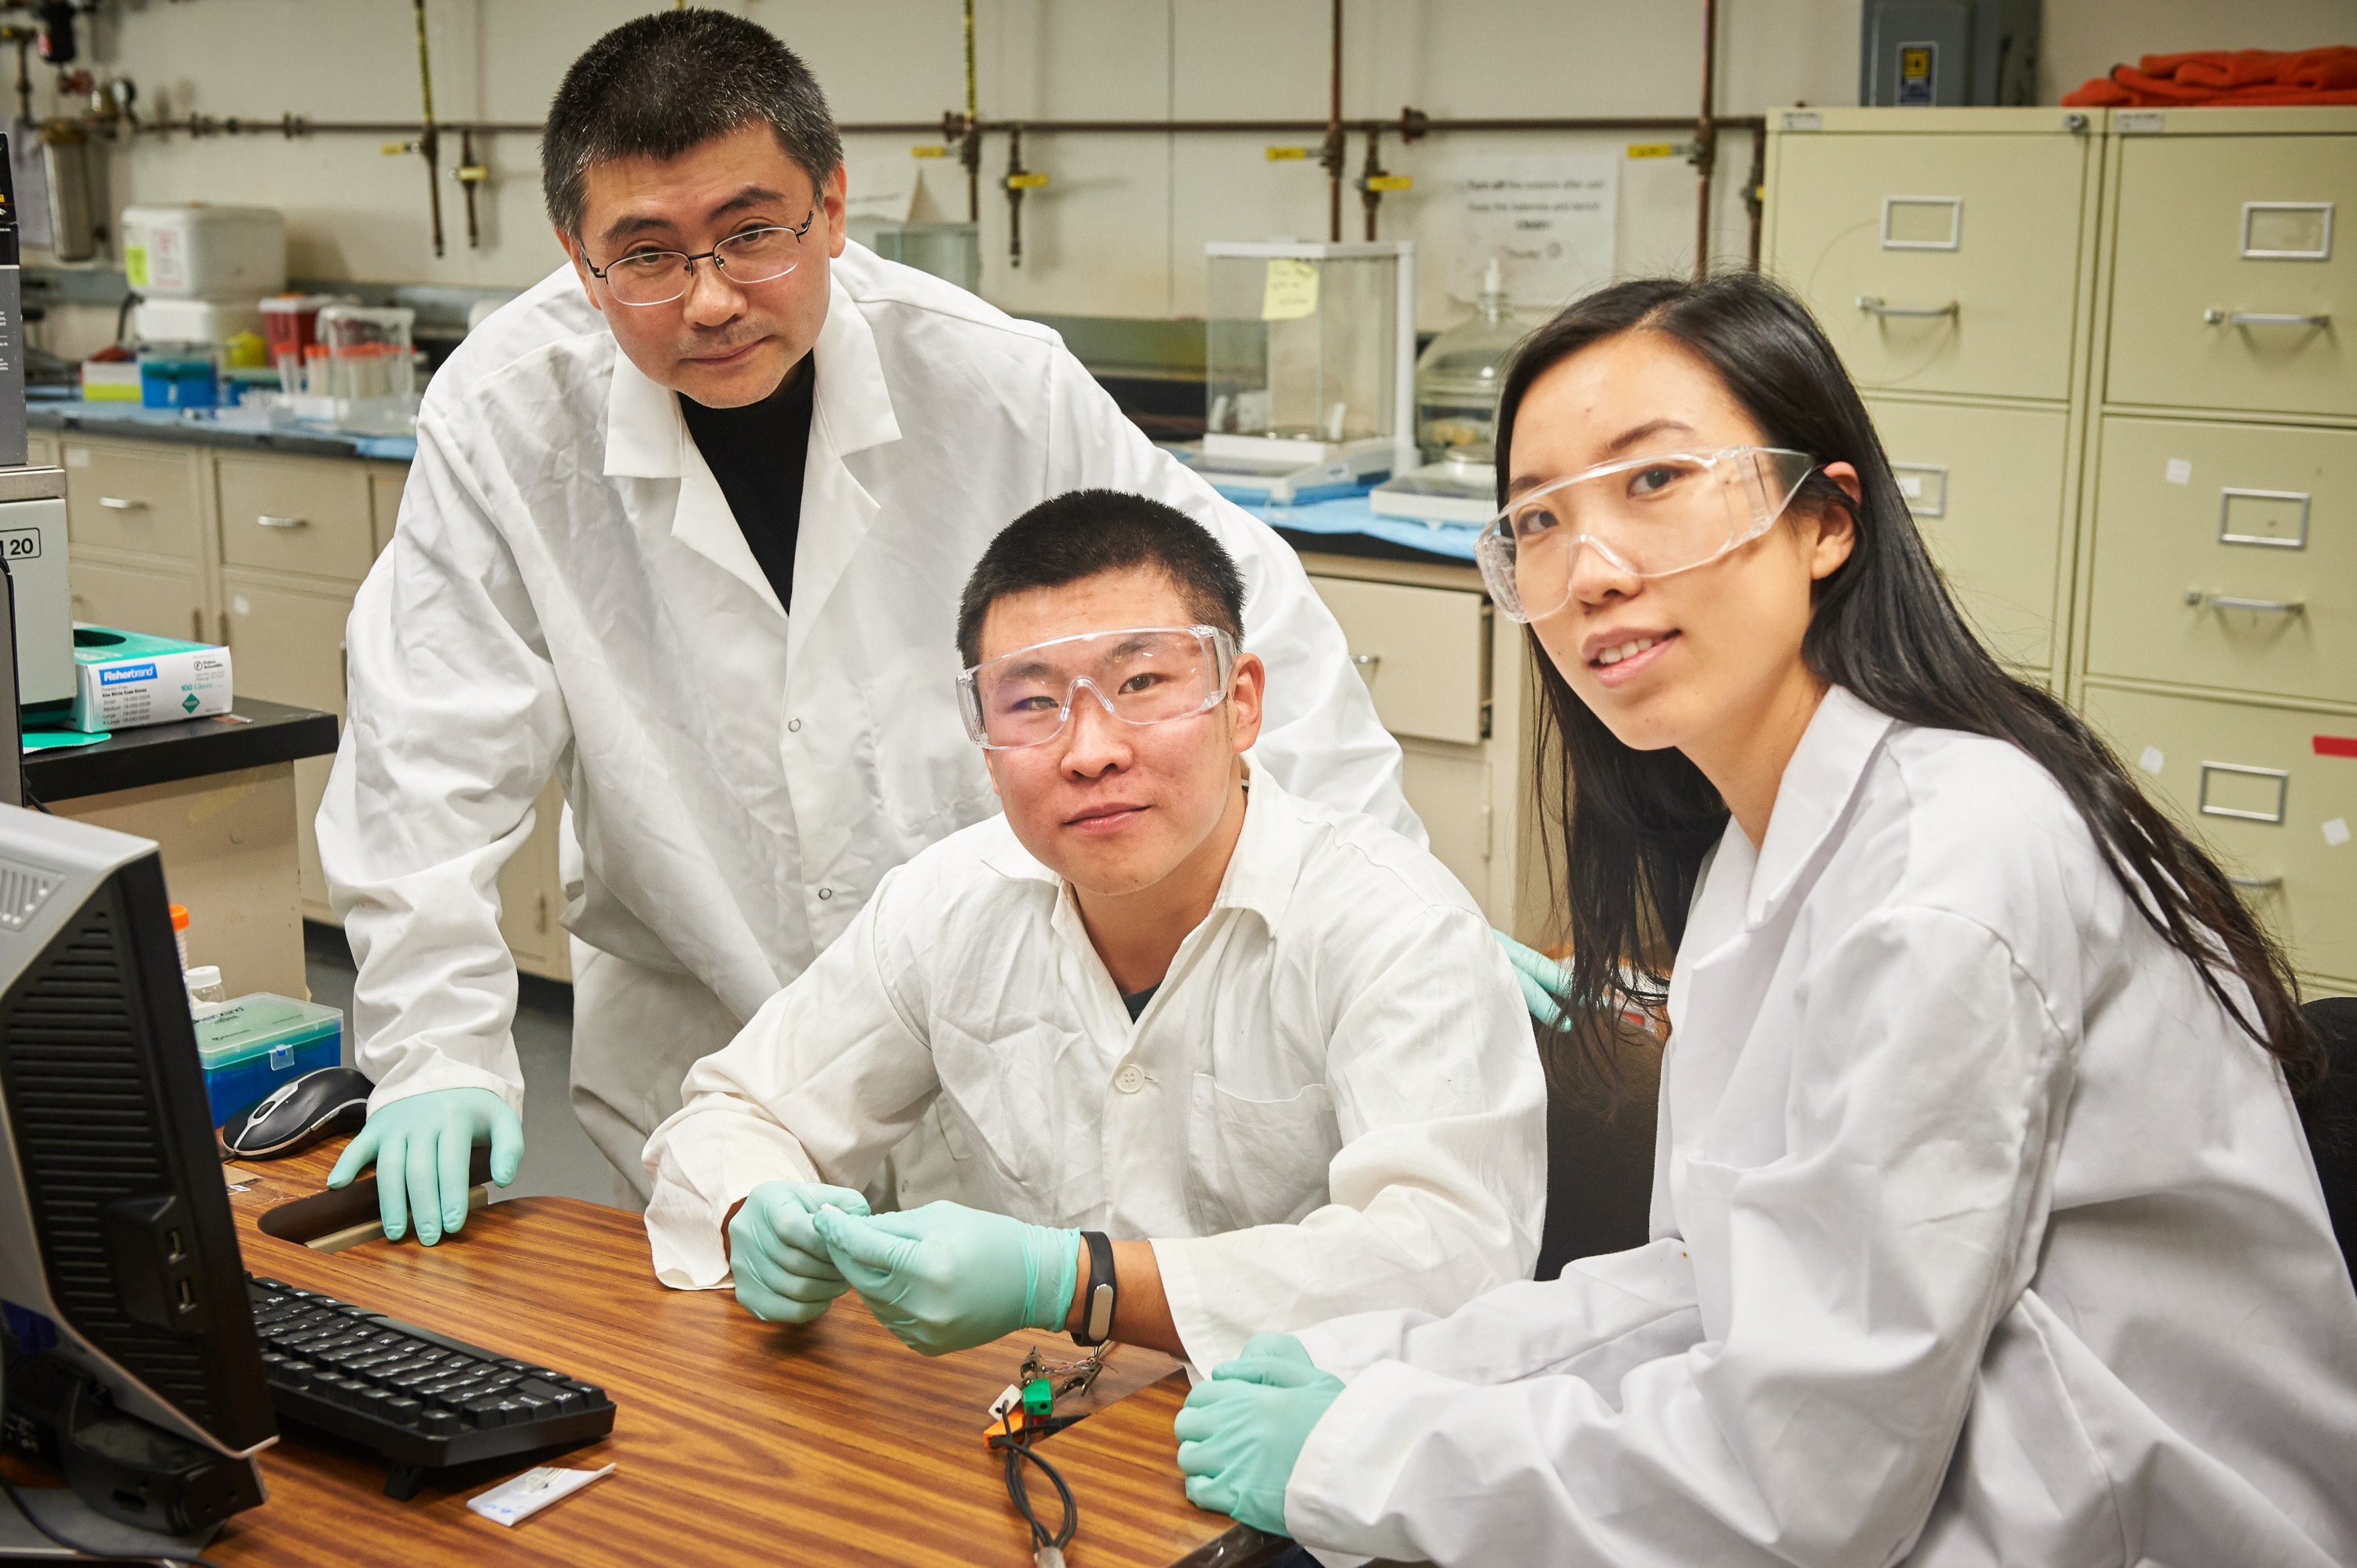 Yu Lei, Centennial Professor of chemical & biomolecular engineering, left, and graduate students in the lab. (Peter Morenus/UConn Photo)